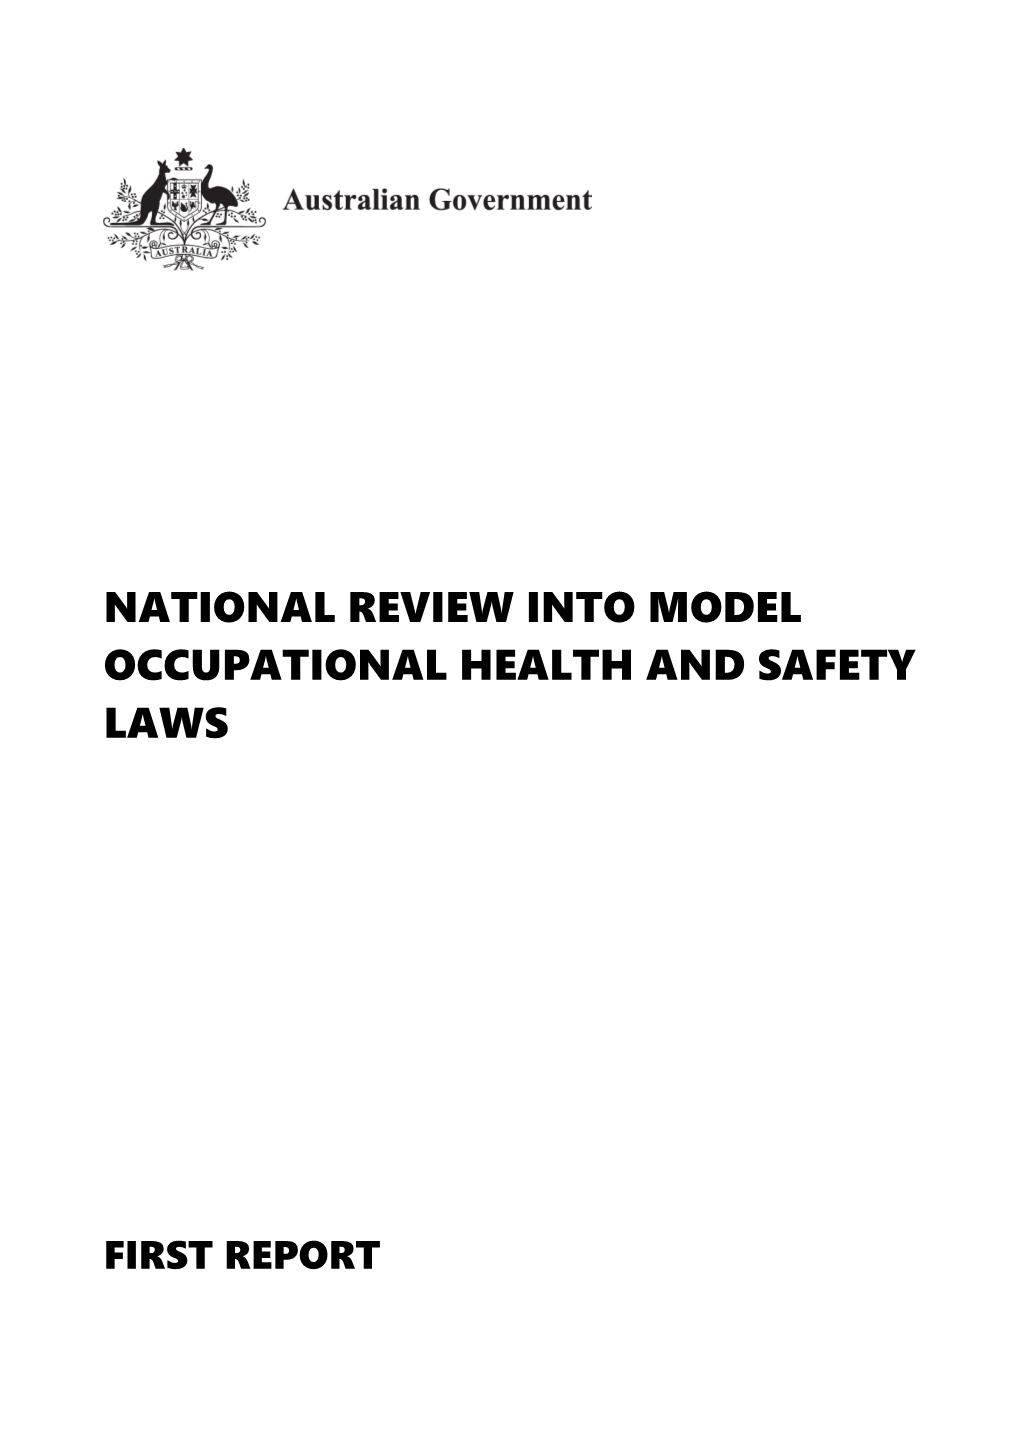 National Review Into Model Occupational Health and Safety Laws